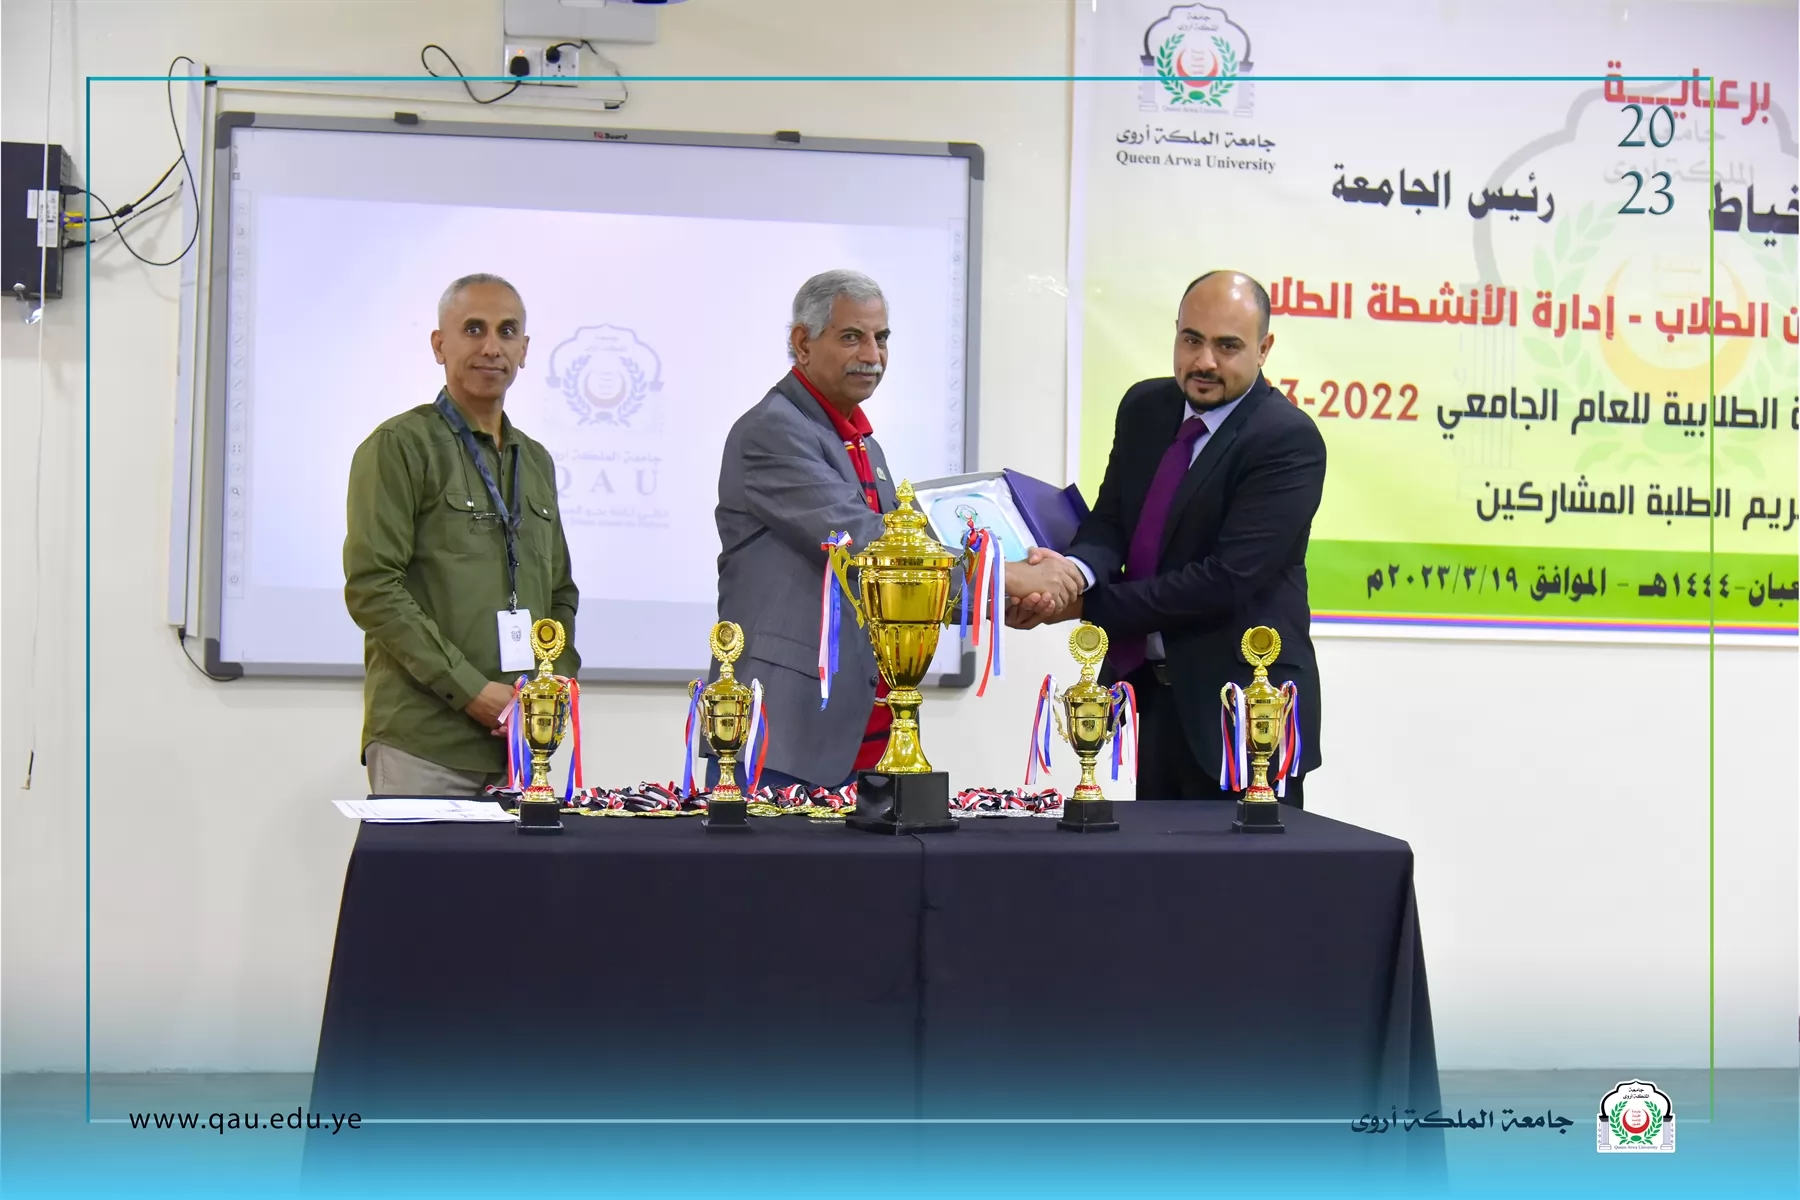 Queen Arwa University organizes its closing ceremony for student activities to honour a constellation of workers and participating students